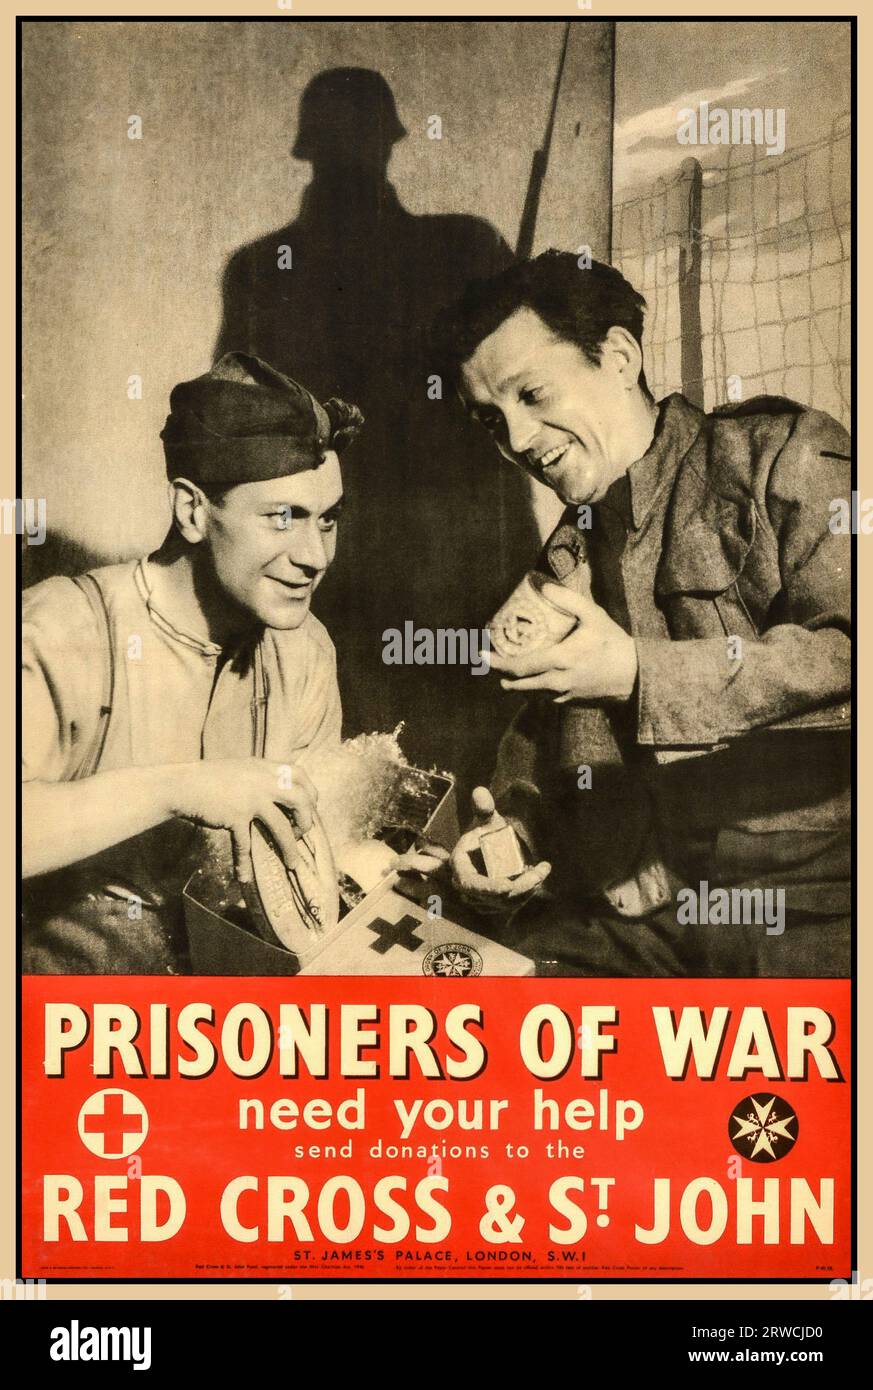 RED CROSS PRISONERS OF WAR WW2 vintage World War Two UK propaganda poster - “Prisoners of War need your help”. “Send donations to the Red Cross & St. John” - featuring a photograph of smiling prisoner soldiers opening a care package with tinned food, with a silhouette of a Nazi Germany armed soldier wearing a German Wehrmacht helmet, by internment camp barbed wire. Printed by Lowe And Brydone Printers issued by Red Cross and St John Fund.UK 1940s. Stock Photo